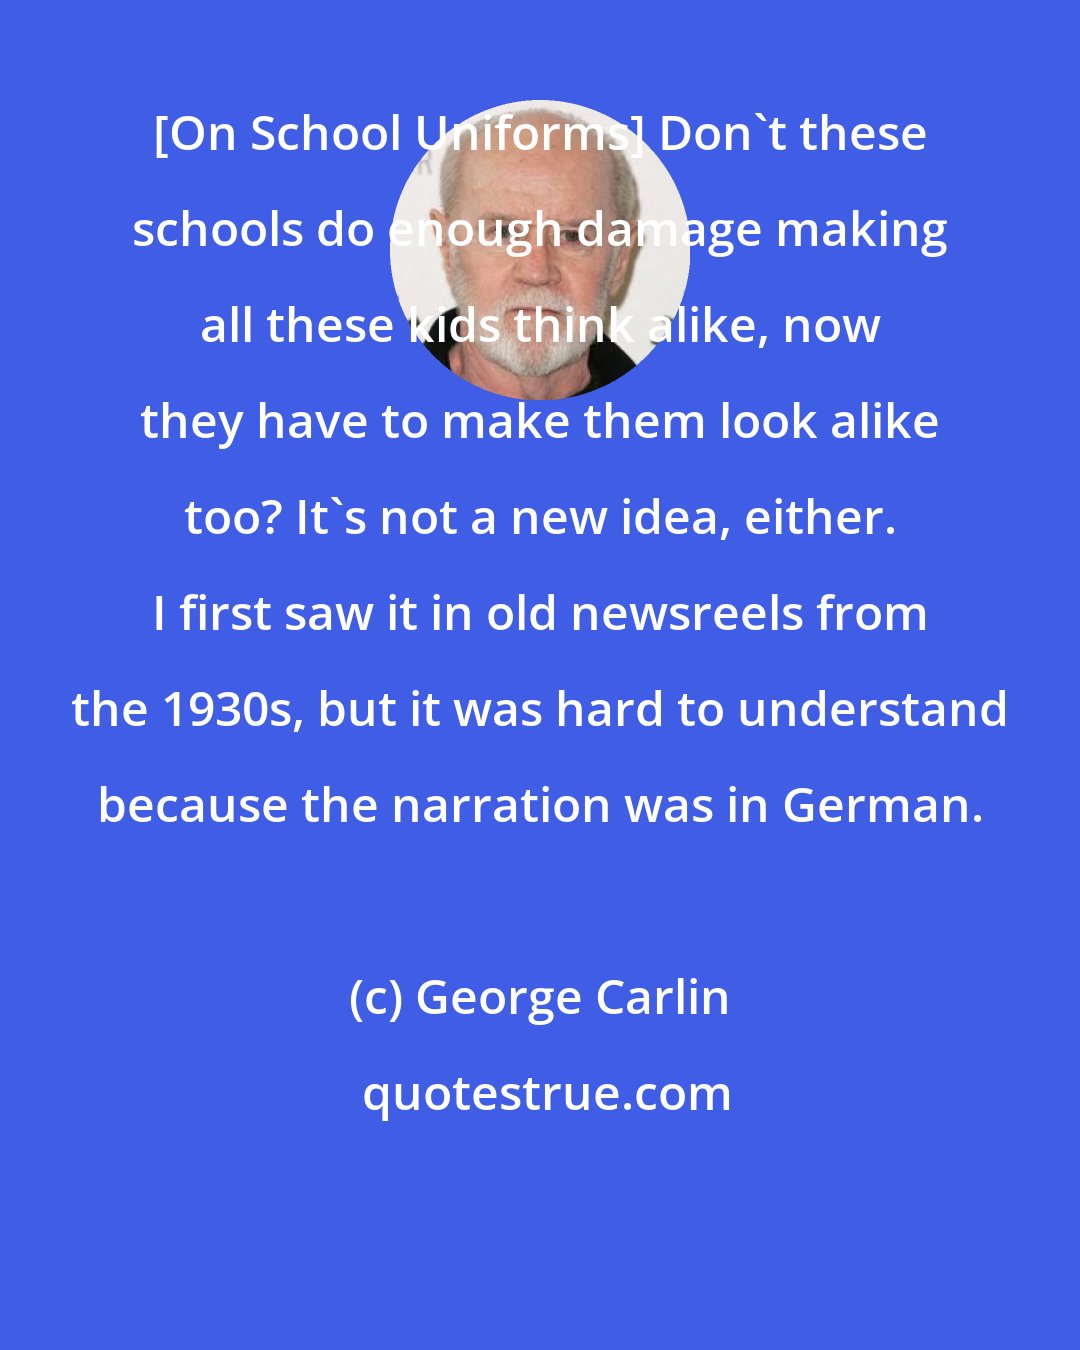 George Carlin: [On School Uniforms] Don't these schools do enough damage making all these kids think alike, now they have to make them look alike too? It's not a new idea, either. I first saw it in old newsreels from the 1930s, but it was hard to understand because the narration was in German.